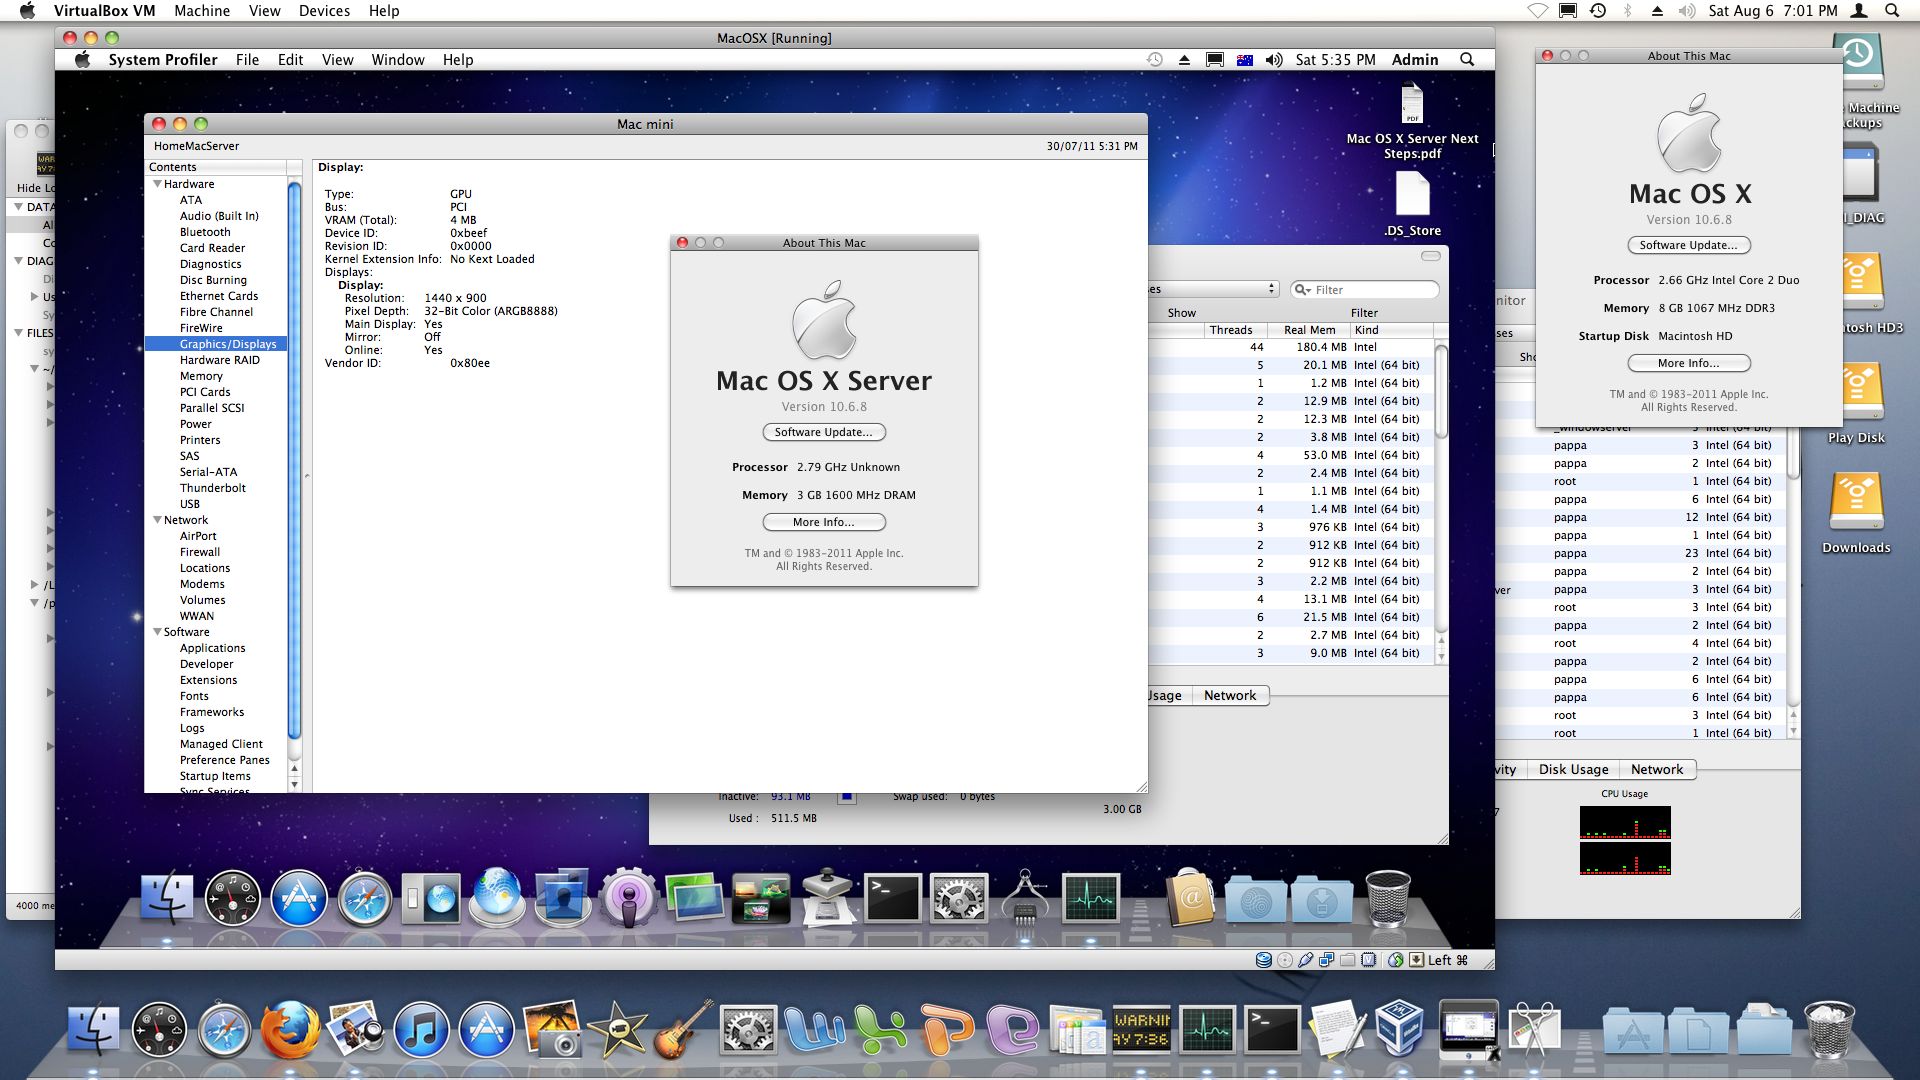 canon scanner drivers for mac os x lion